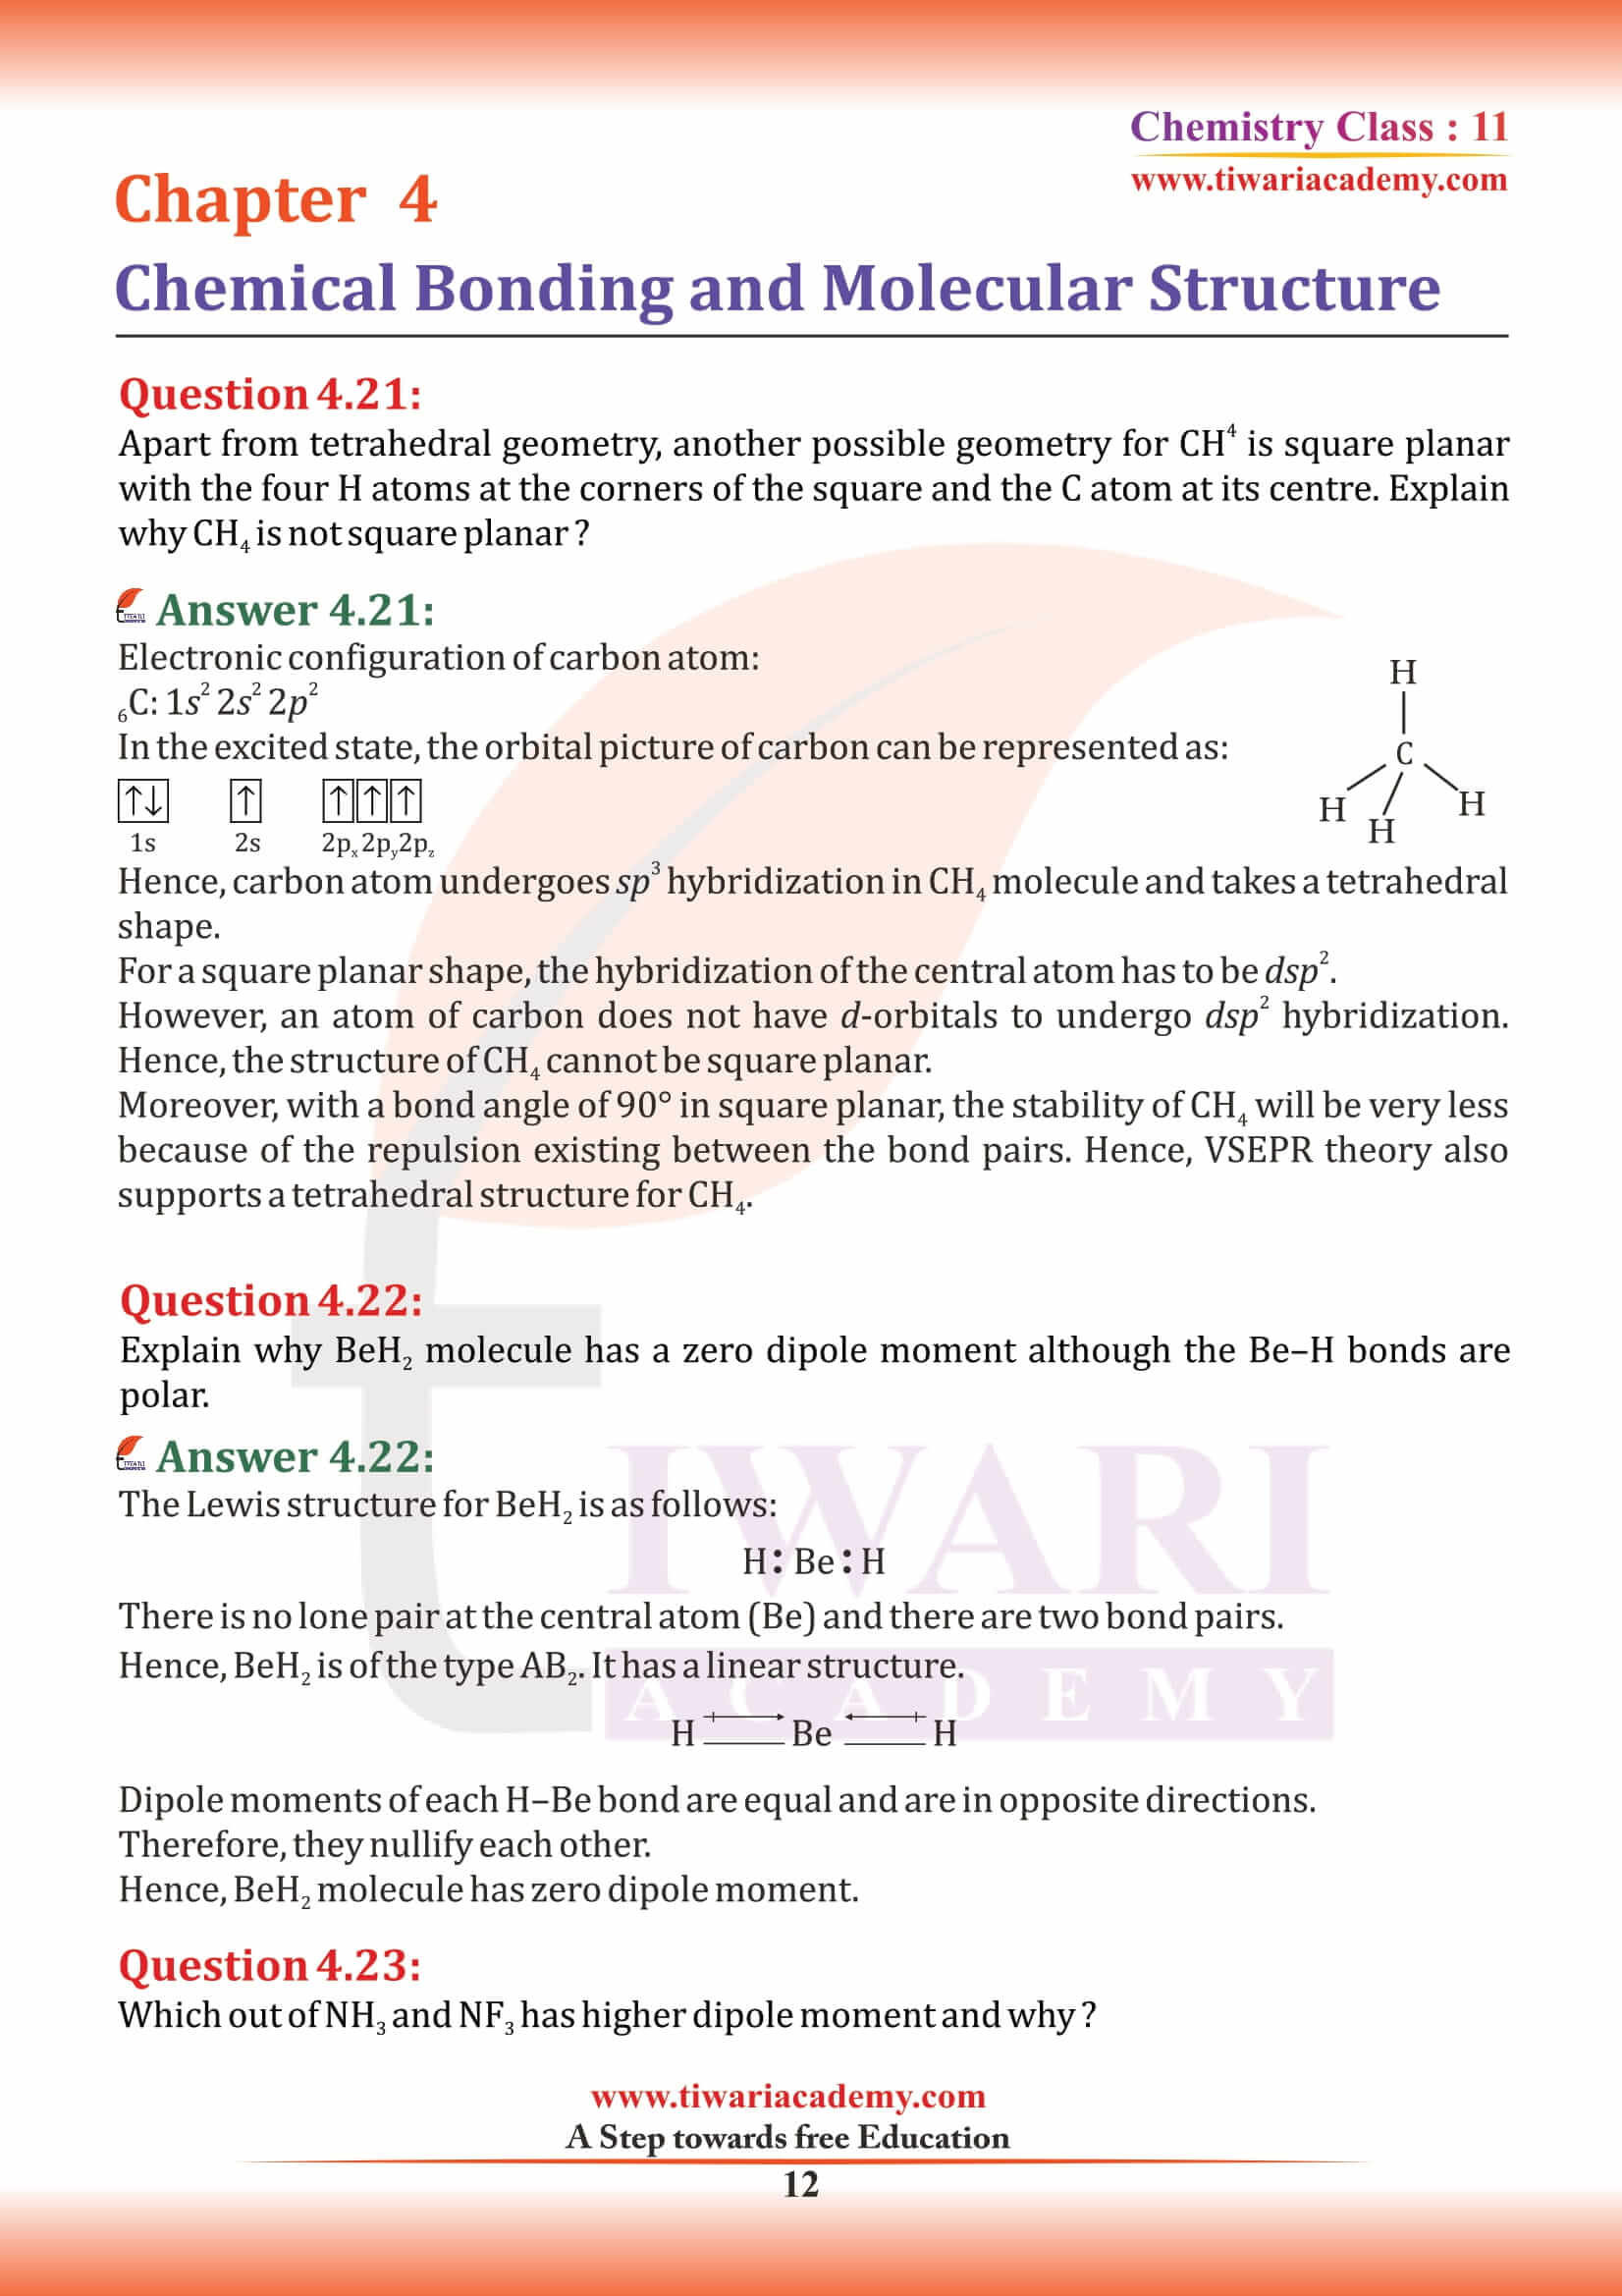 NCERT Solutions for Class 11 Chemistry Chapter 4 in English